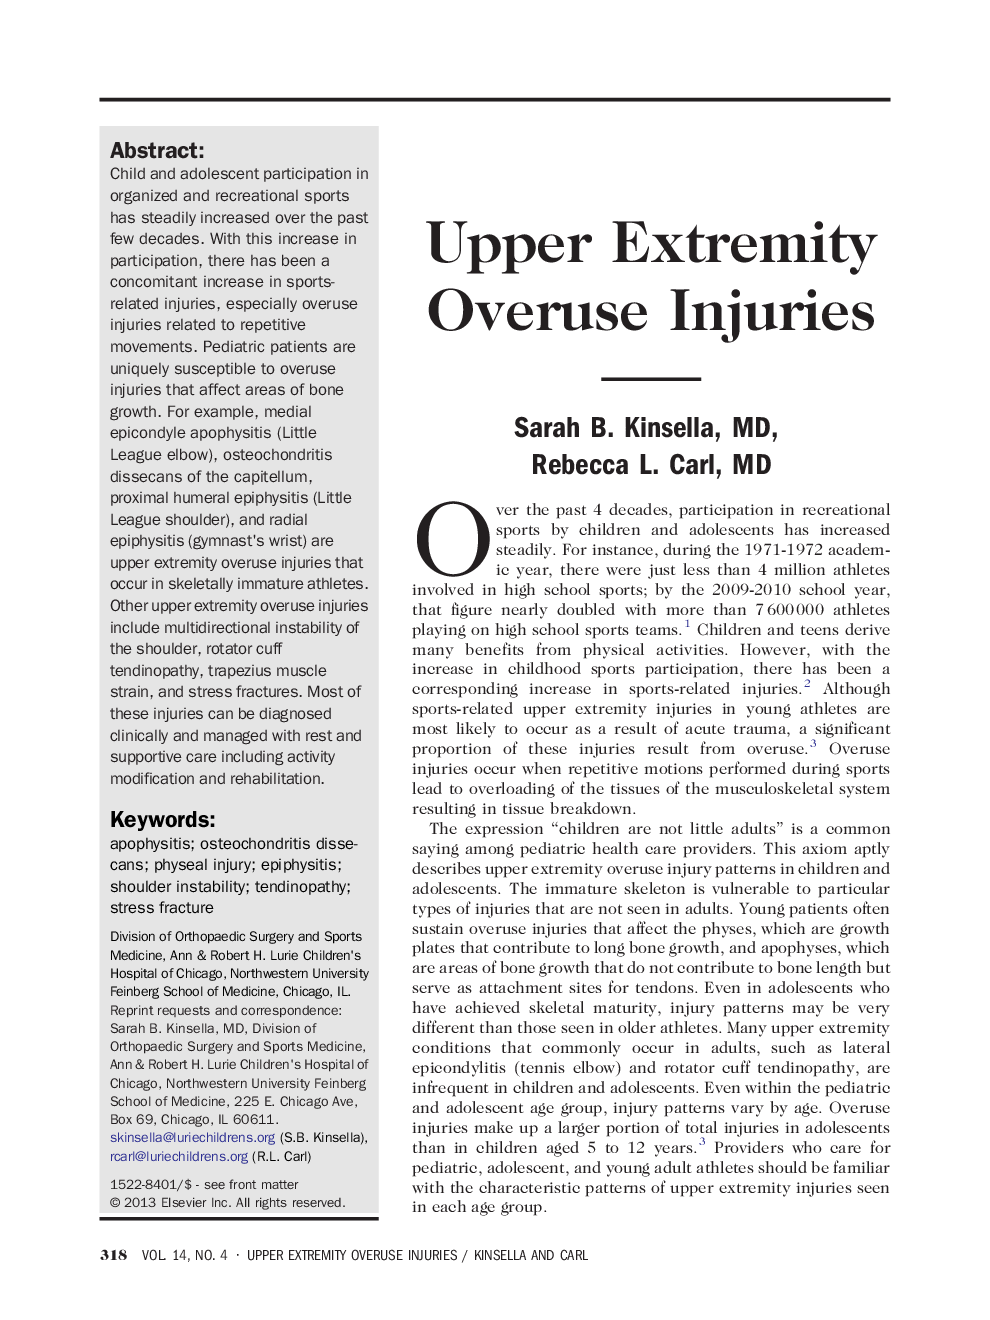 Upper Extremity Overuse Injuries